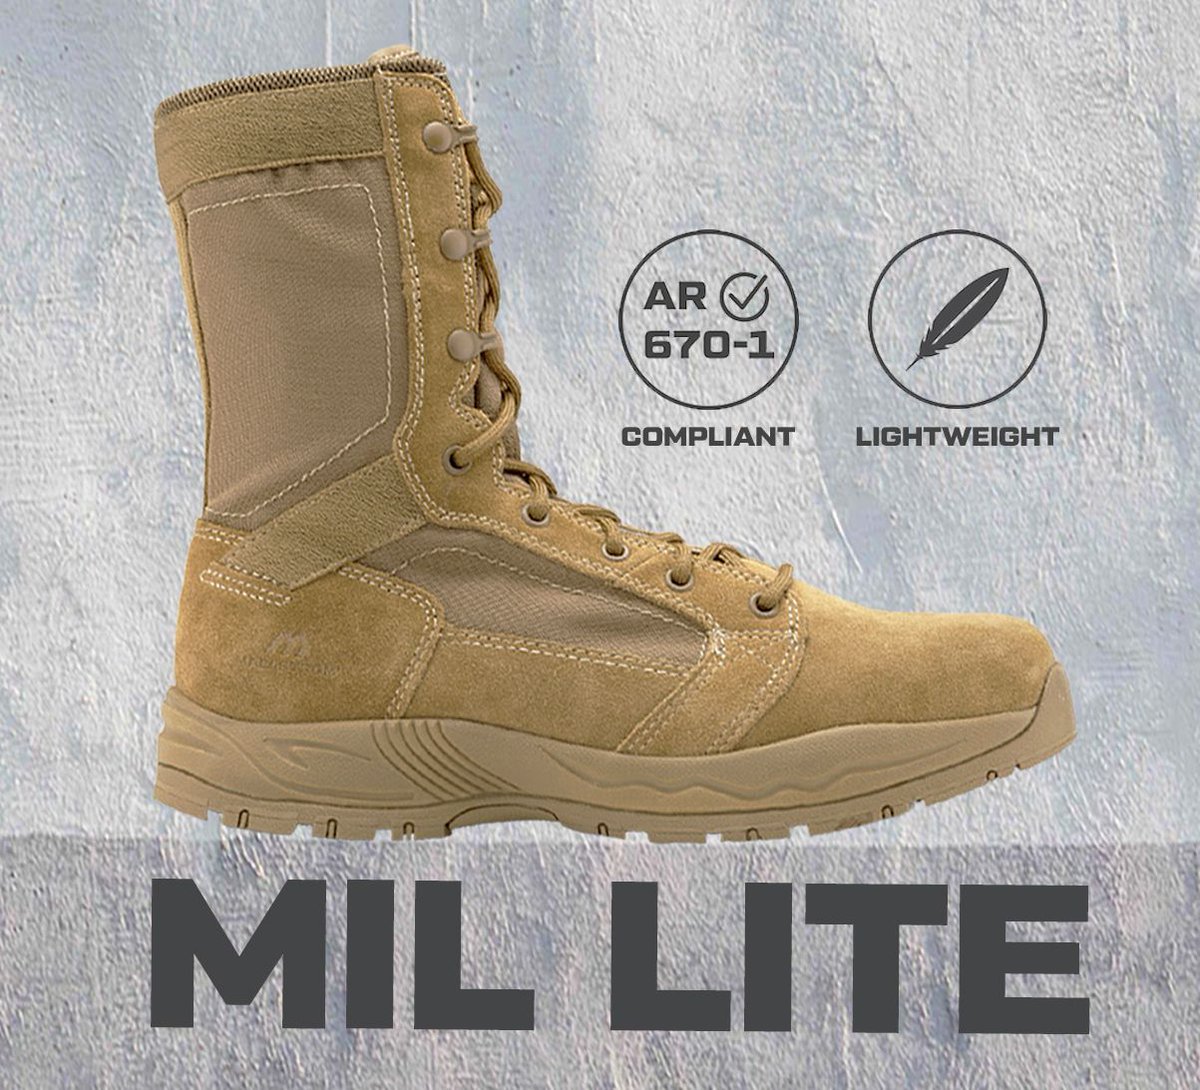 Maelstrom Mil Lite Mens 9 Coyote Brown Military Boot AR 670-1 Compliant 